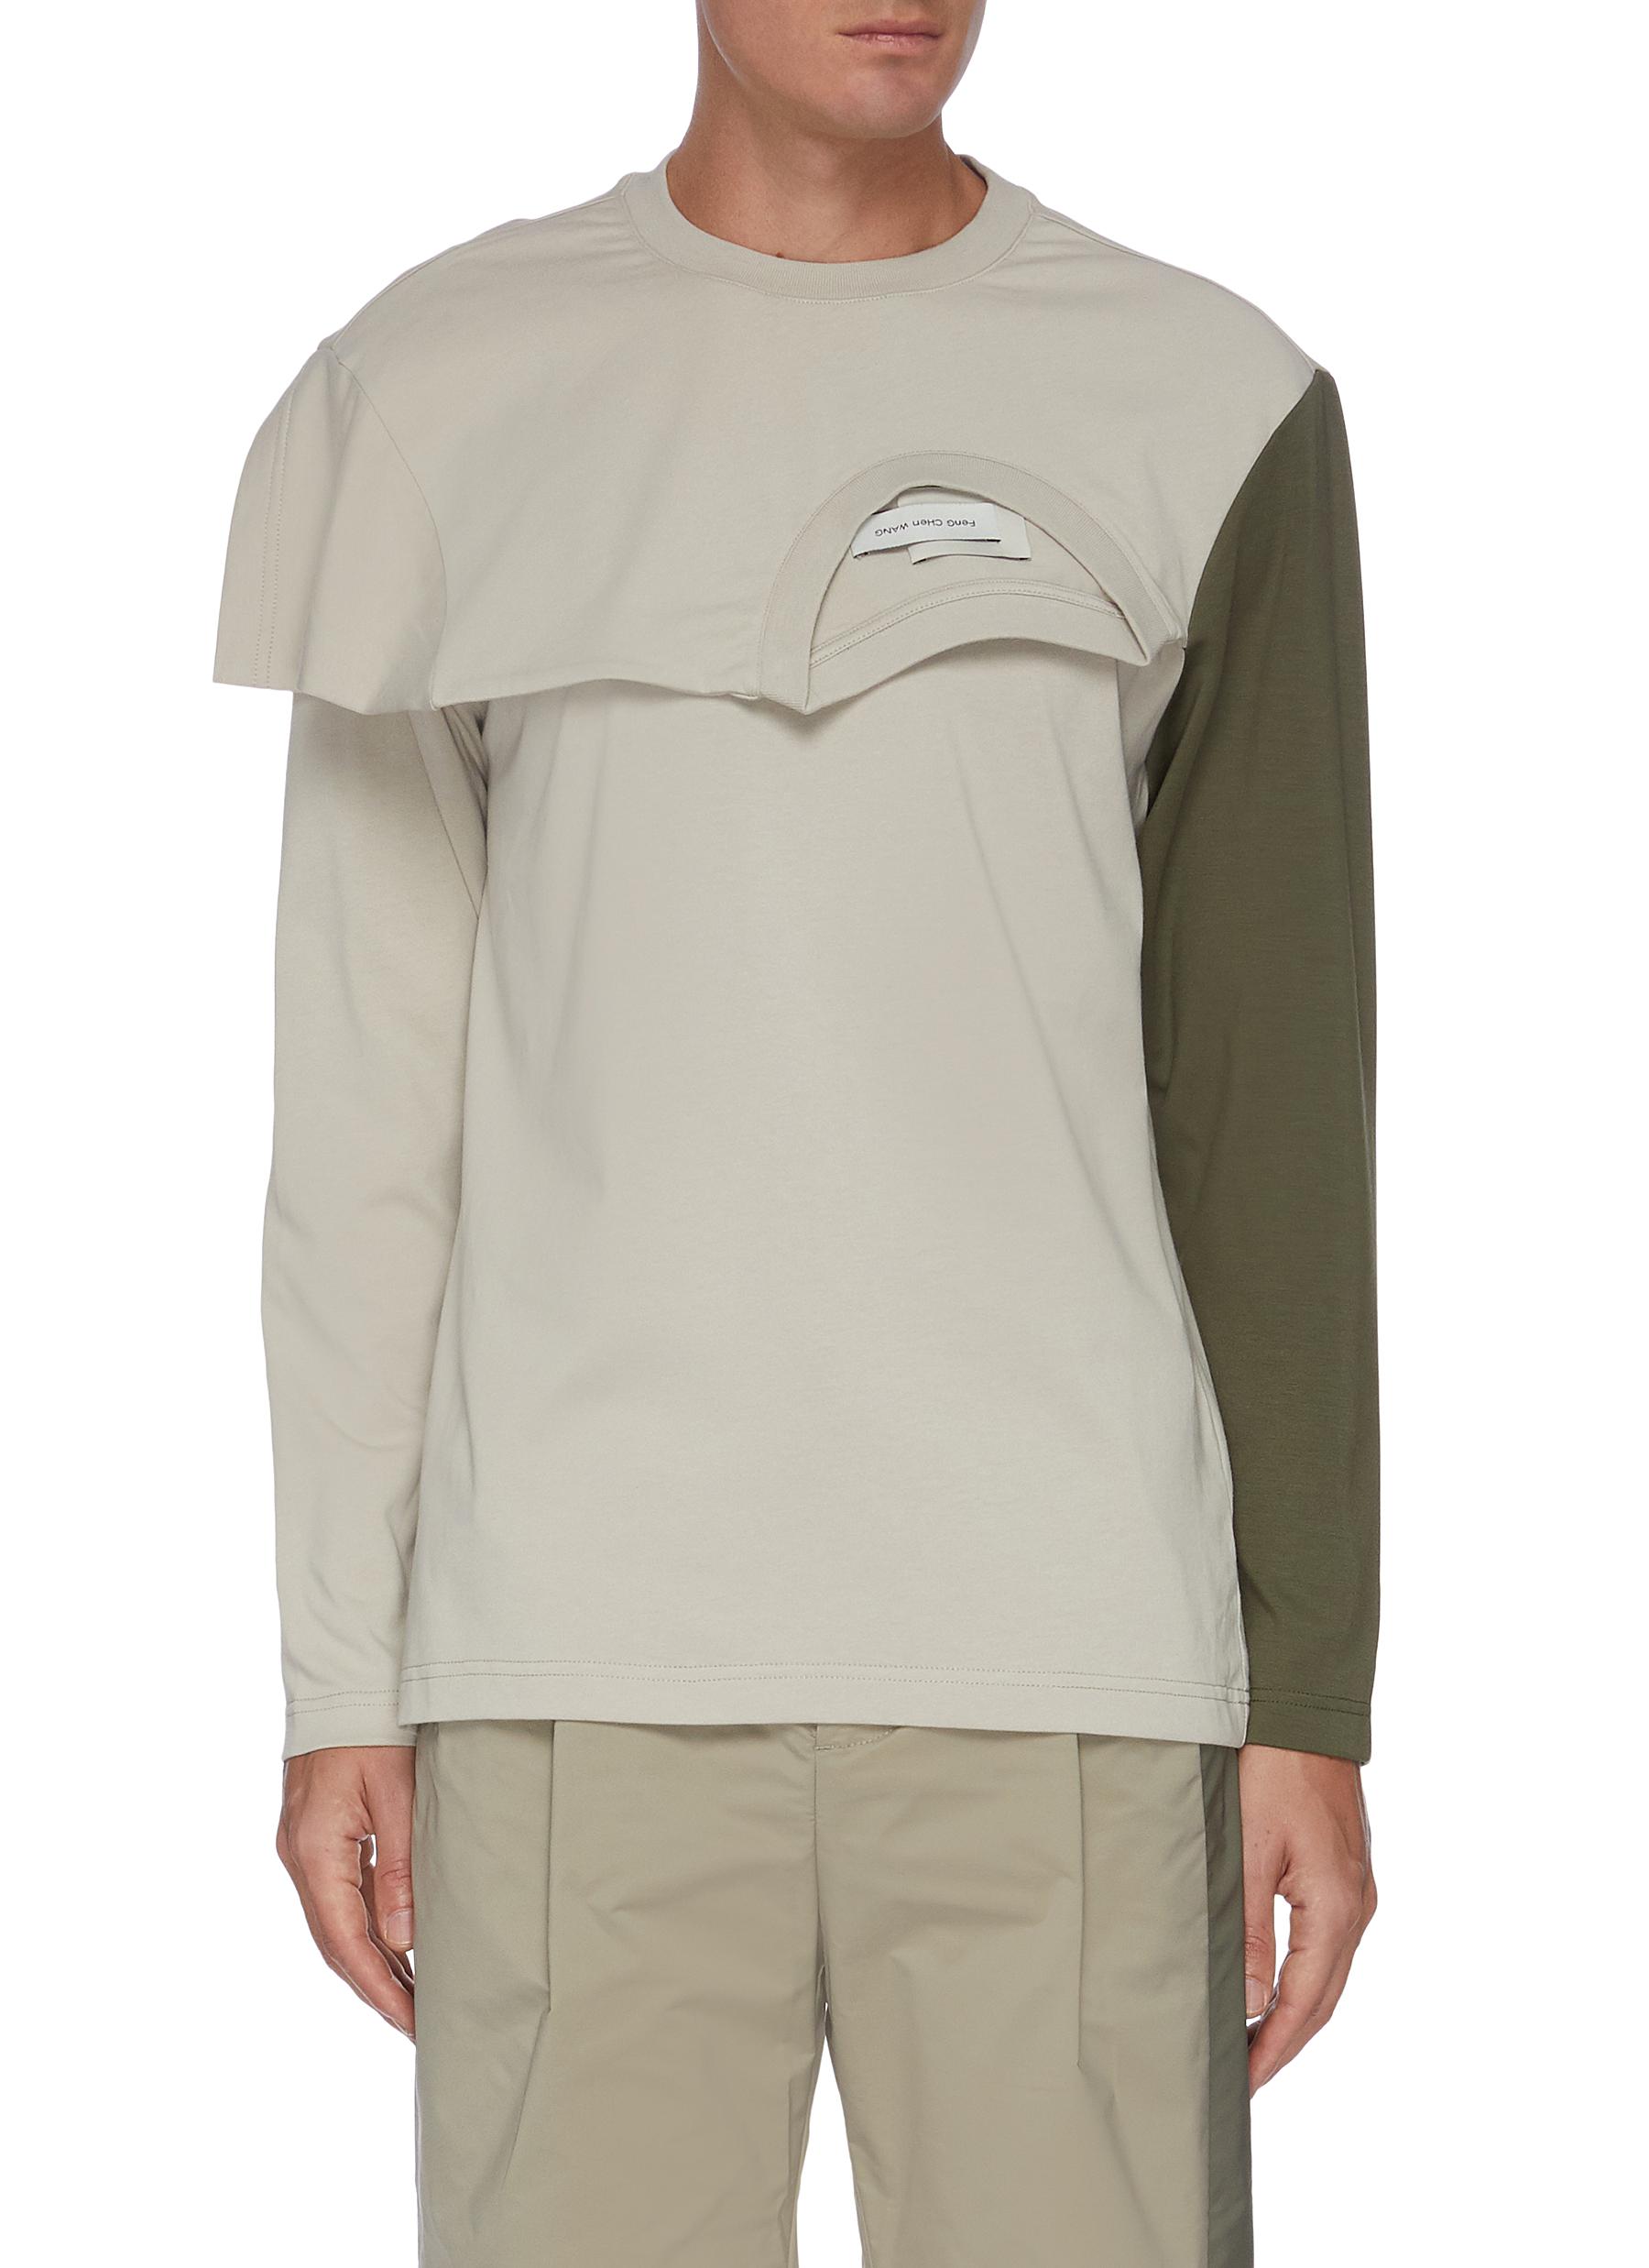 Feng Chen Wang Deconstructed T-shirt Panel Contrast Sleeve Top In Green